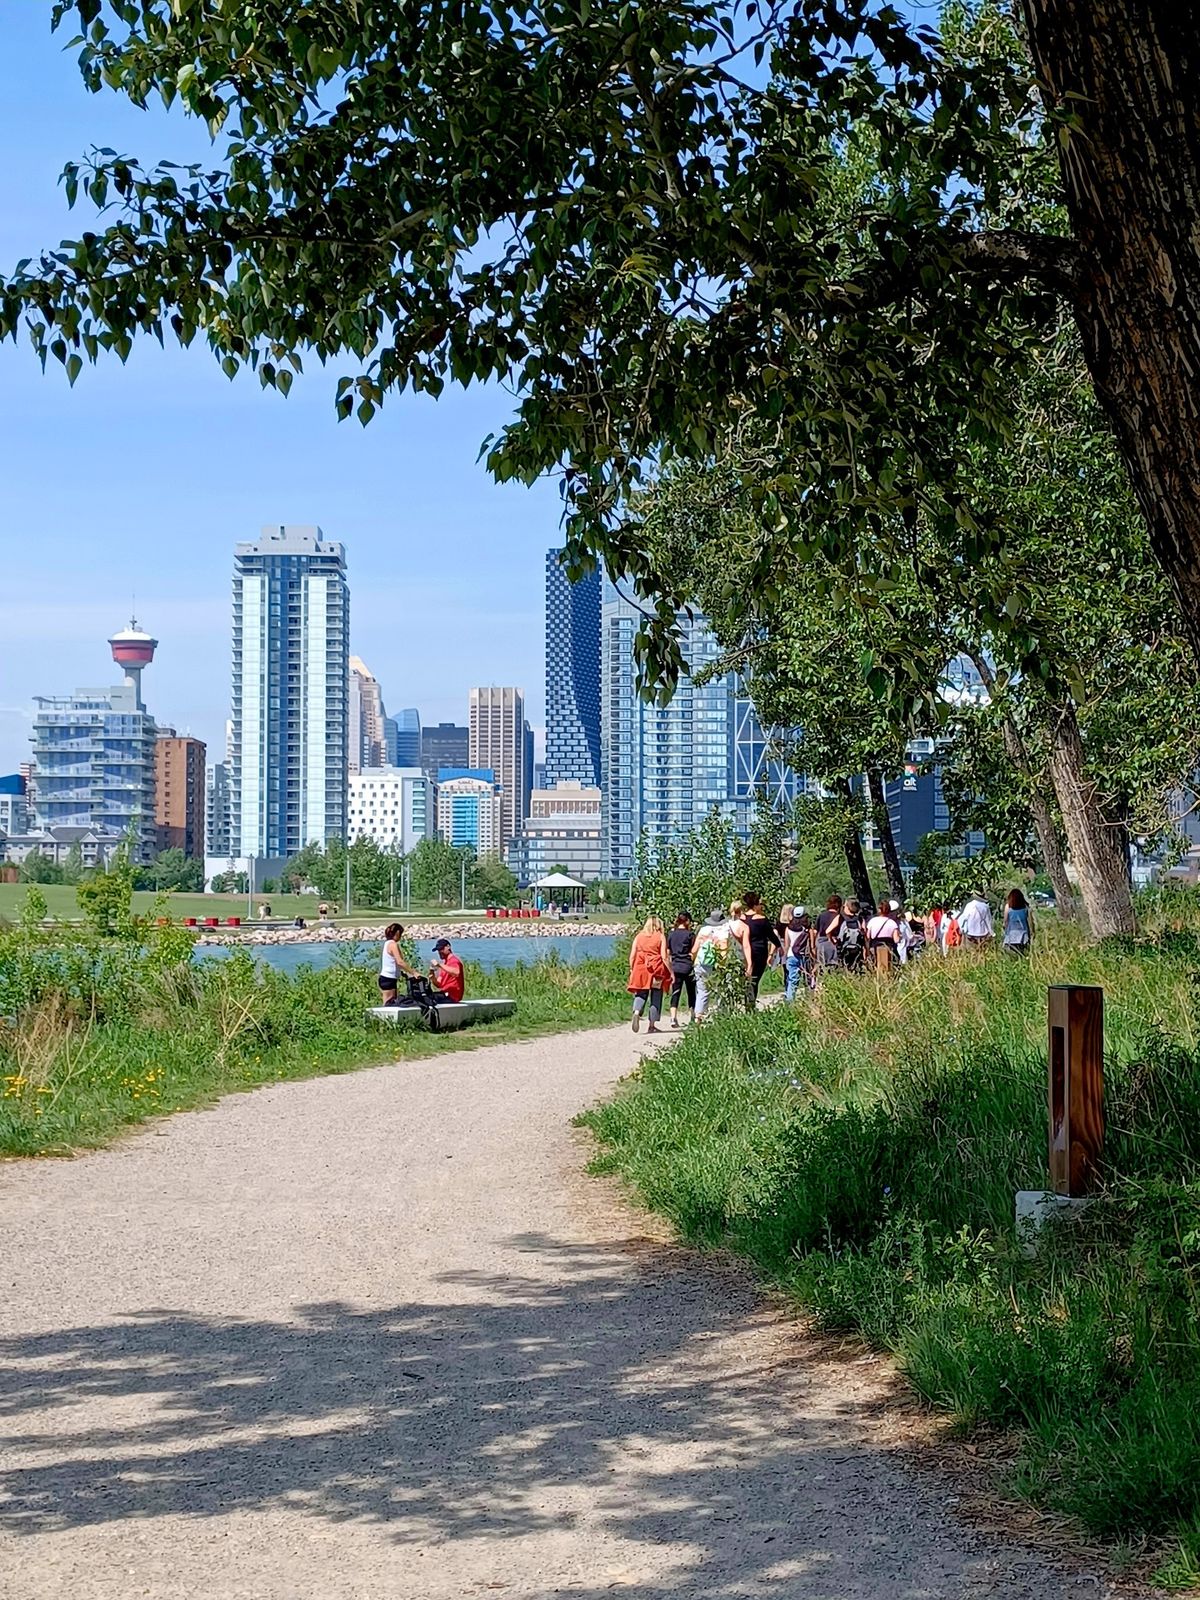 At 1 pm next Sunday, walk Calgary's Bow River Pathway. Newcomers are welcome. Just show up.